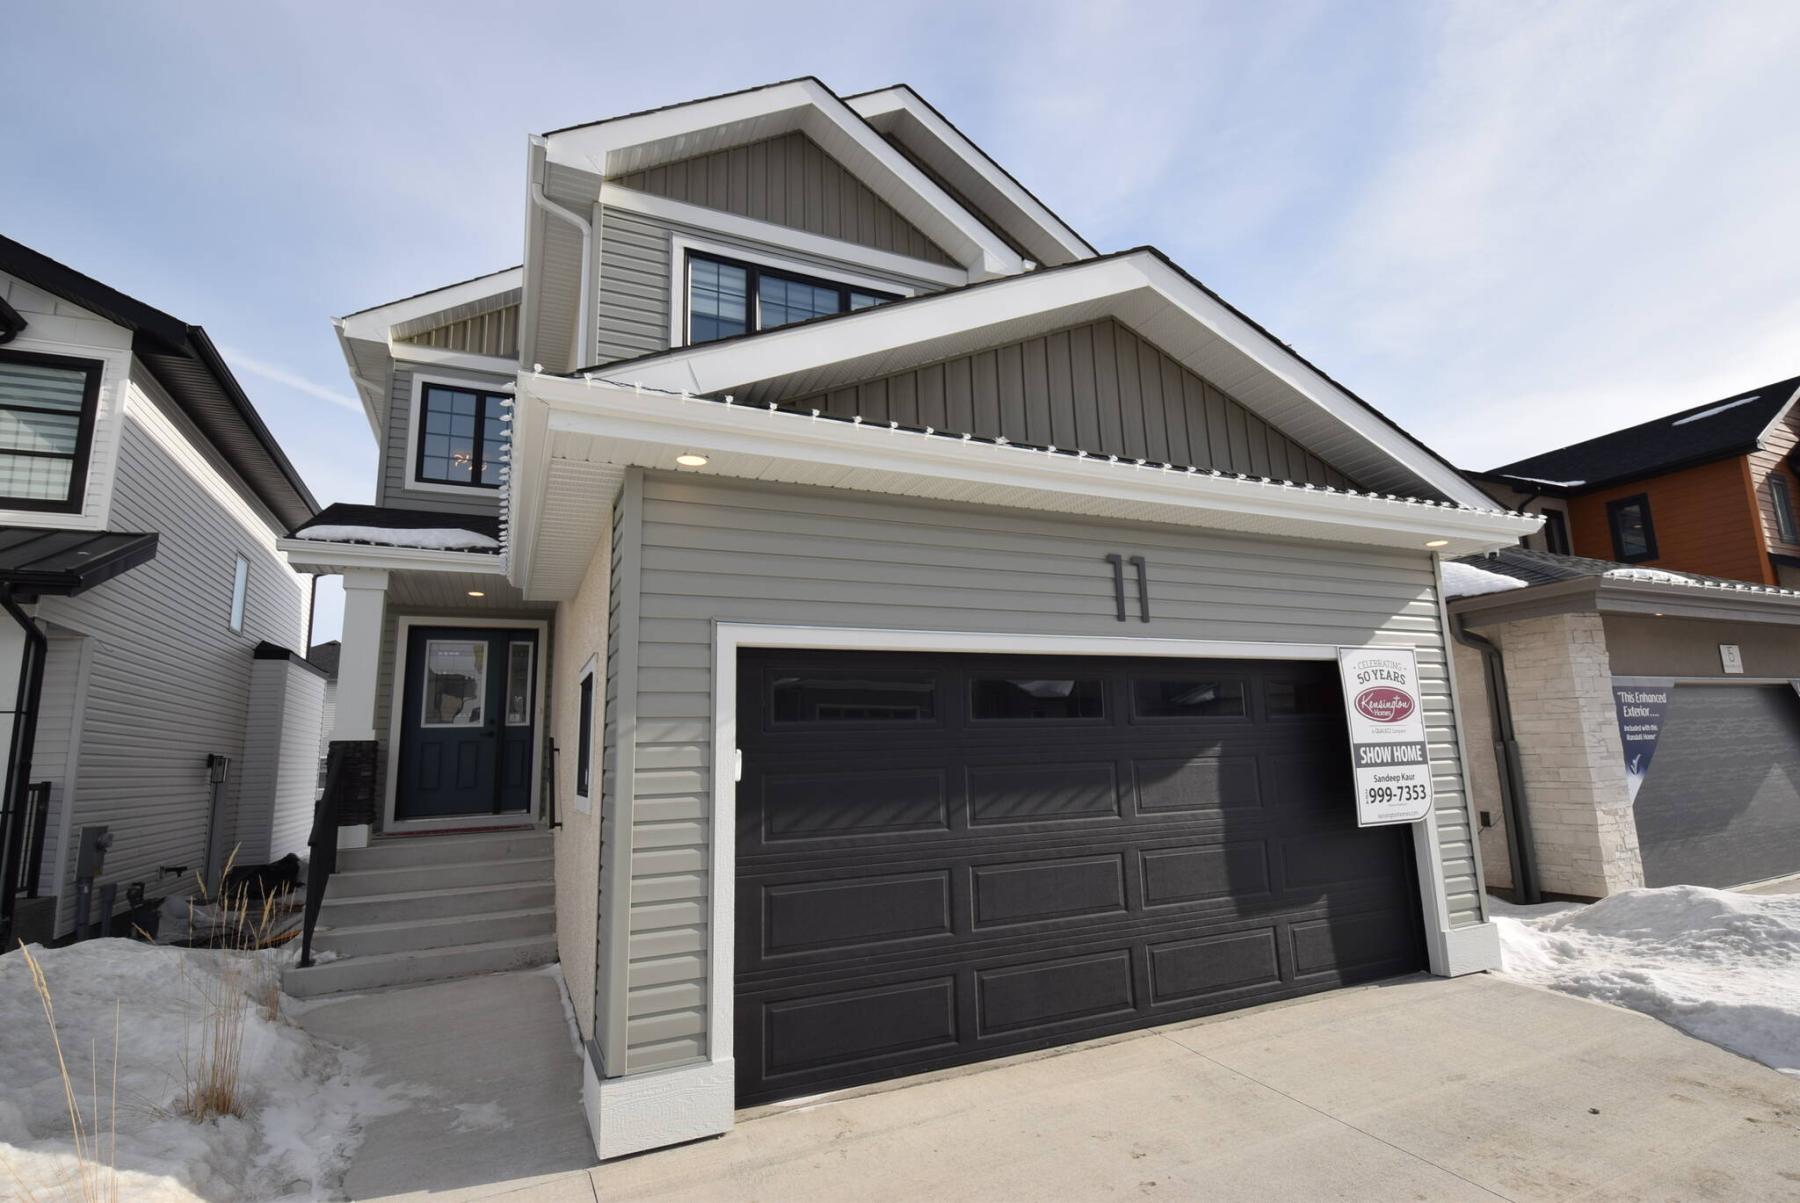  <p>Photos by Todd Lewys / Winnipeg Free Press</p>
                                <p>The two-storey Hillcrest hits all the right notes for families with its excellent use of space, efficient layout and attractive, high-quality finishes.</p> 